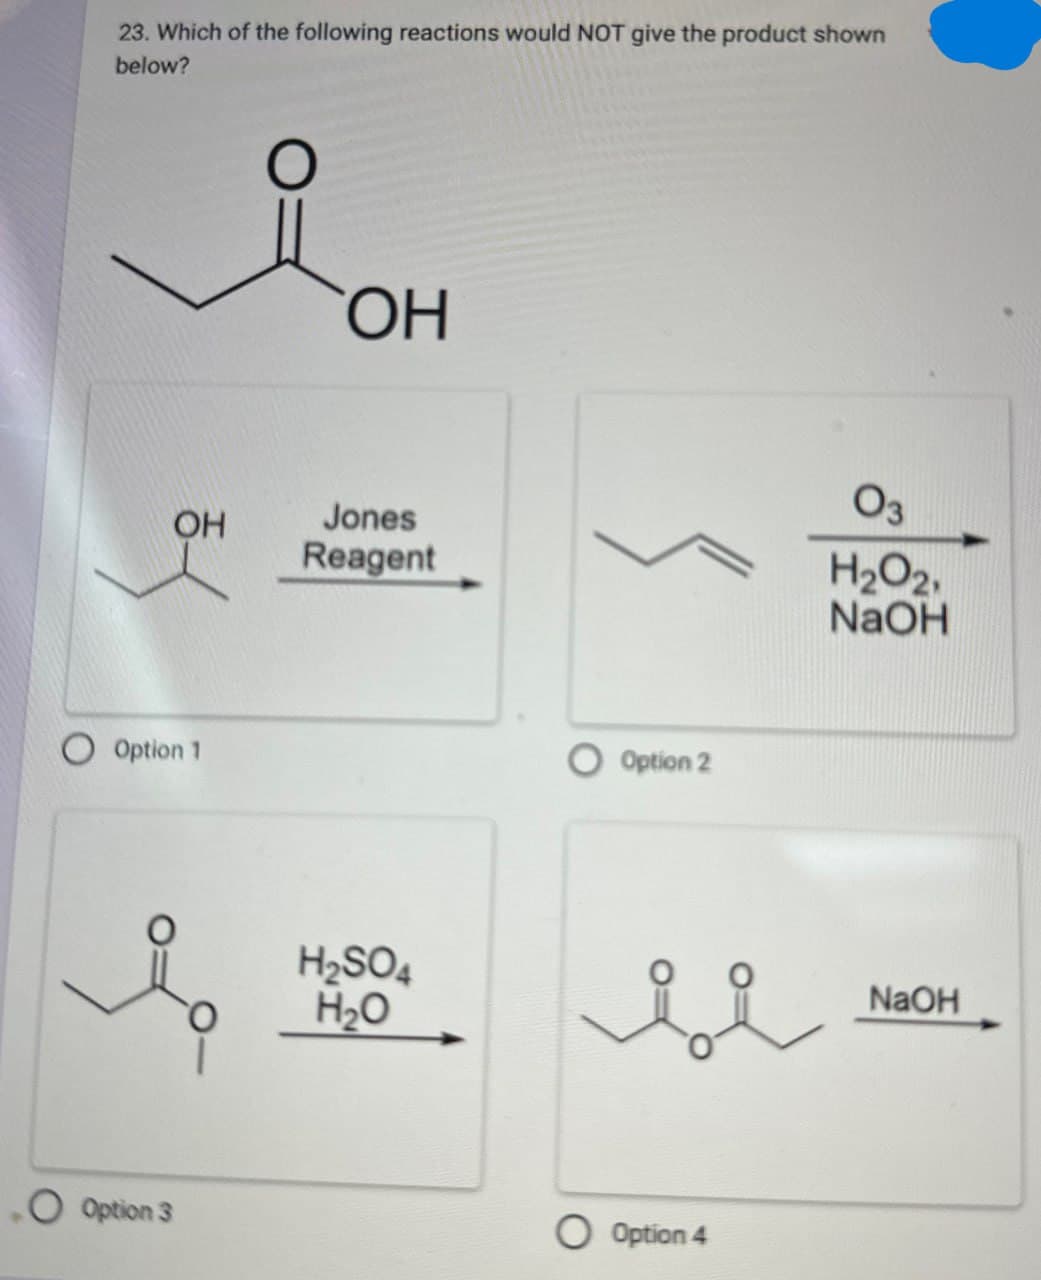 23. Which of the following reactions would NOT give the product shown
below?
OH
OH
Jones
Reagent
Option 1
O Option 2
03
H₂O2,
NaOH
H2SO4
H₂O
ii
NaOH
O Option 3
O Option 4